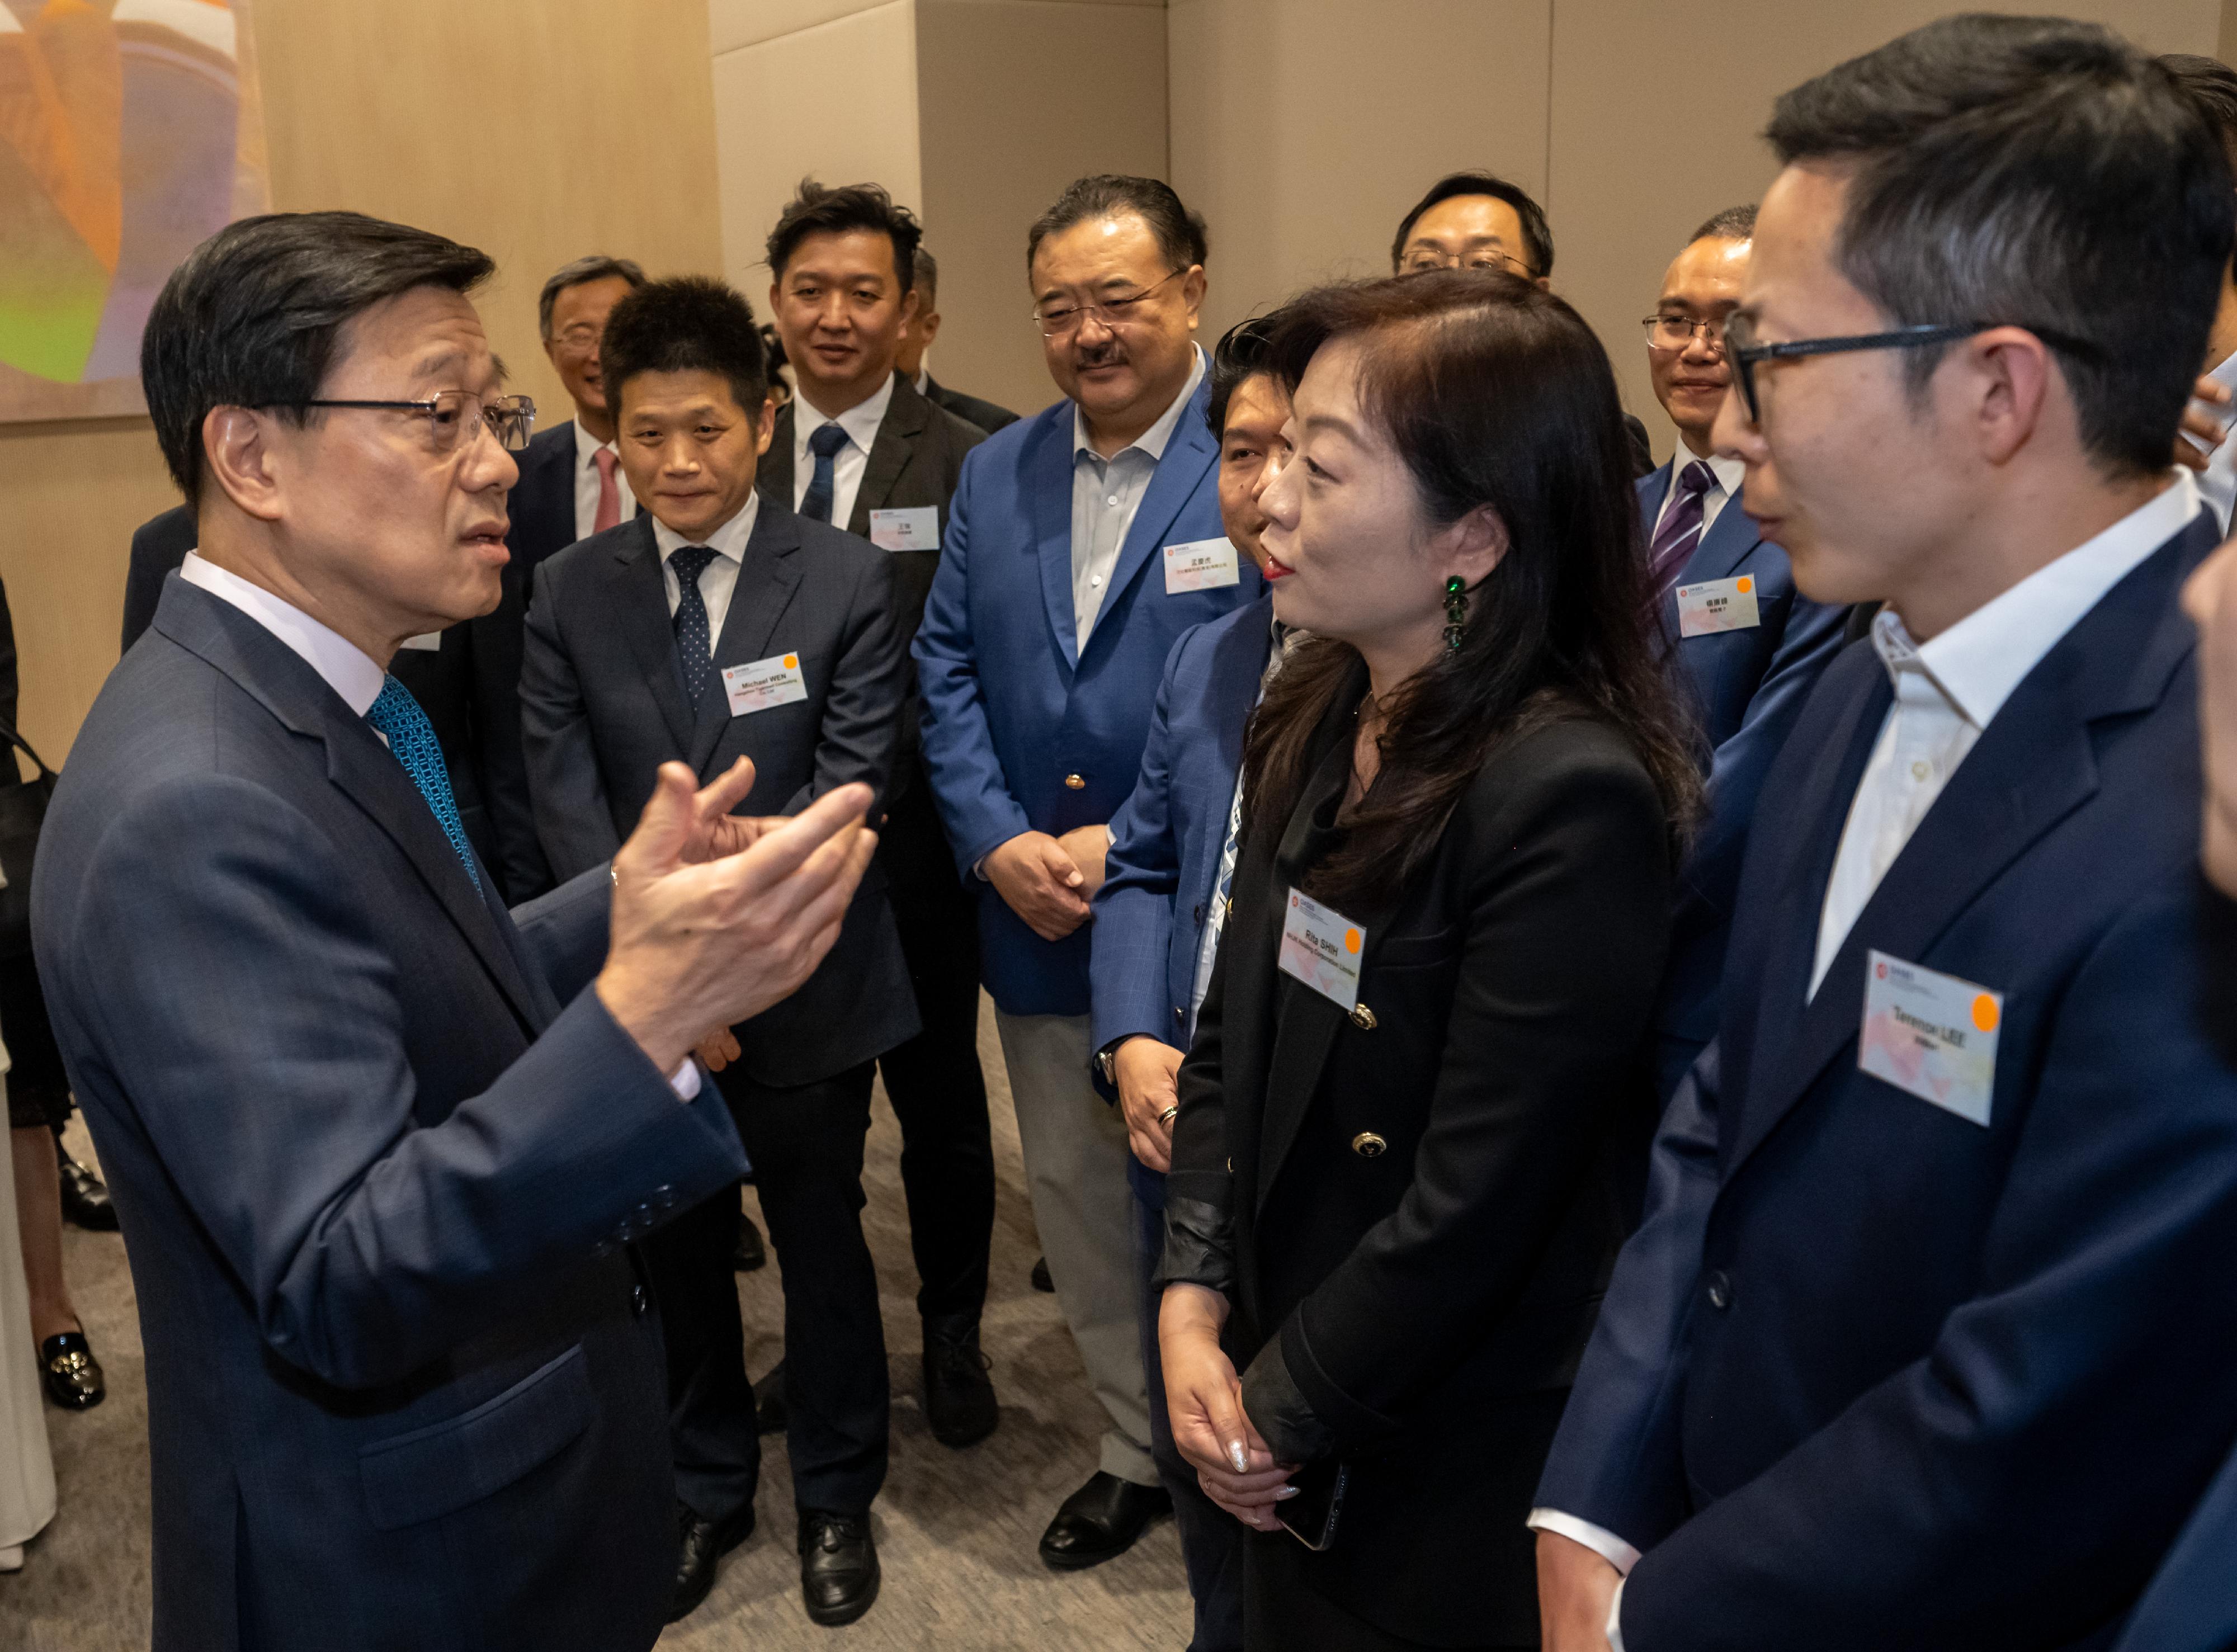 The Office for Attracting Attracting Strategic Enterprises (OASES) held the Launching Ceremony of OASES Partnership. Photo shows the Chief Executive, Mr John Lee (first left), interacting with the representatives of strategic enterprises.